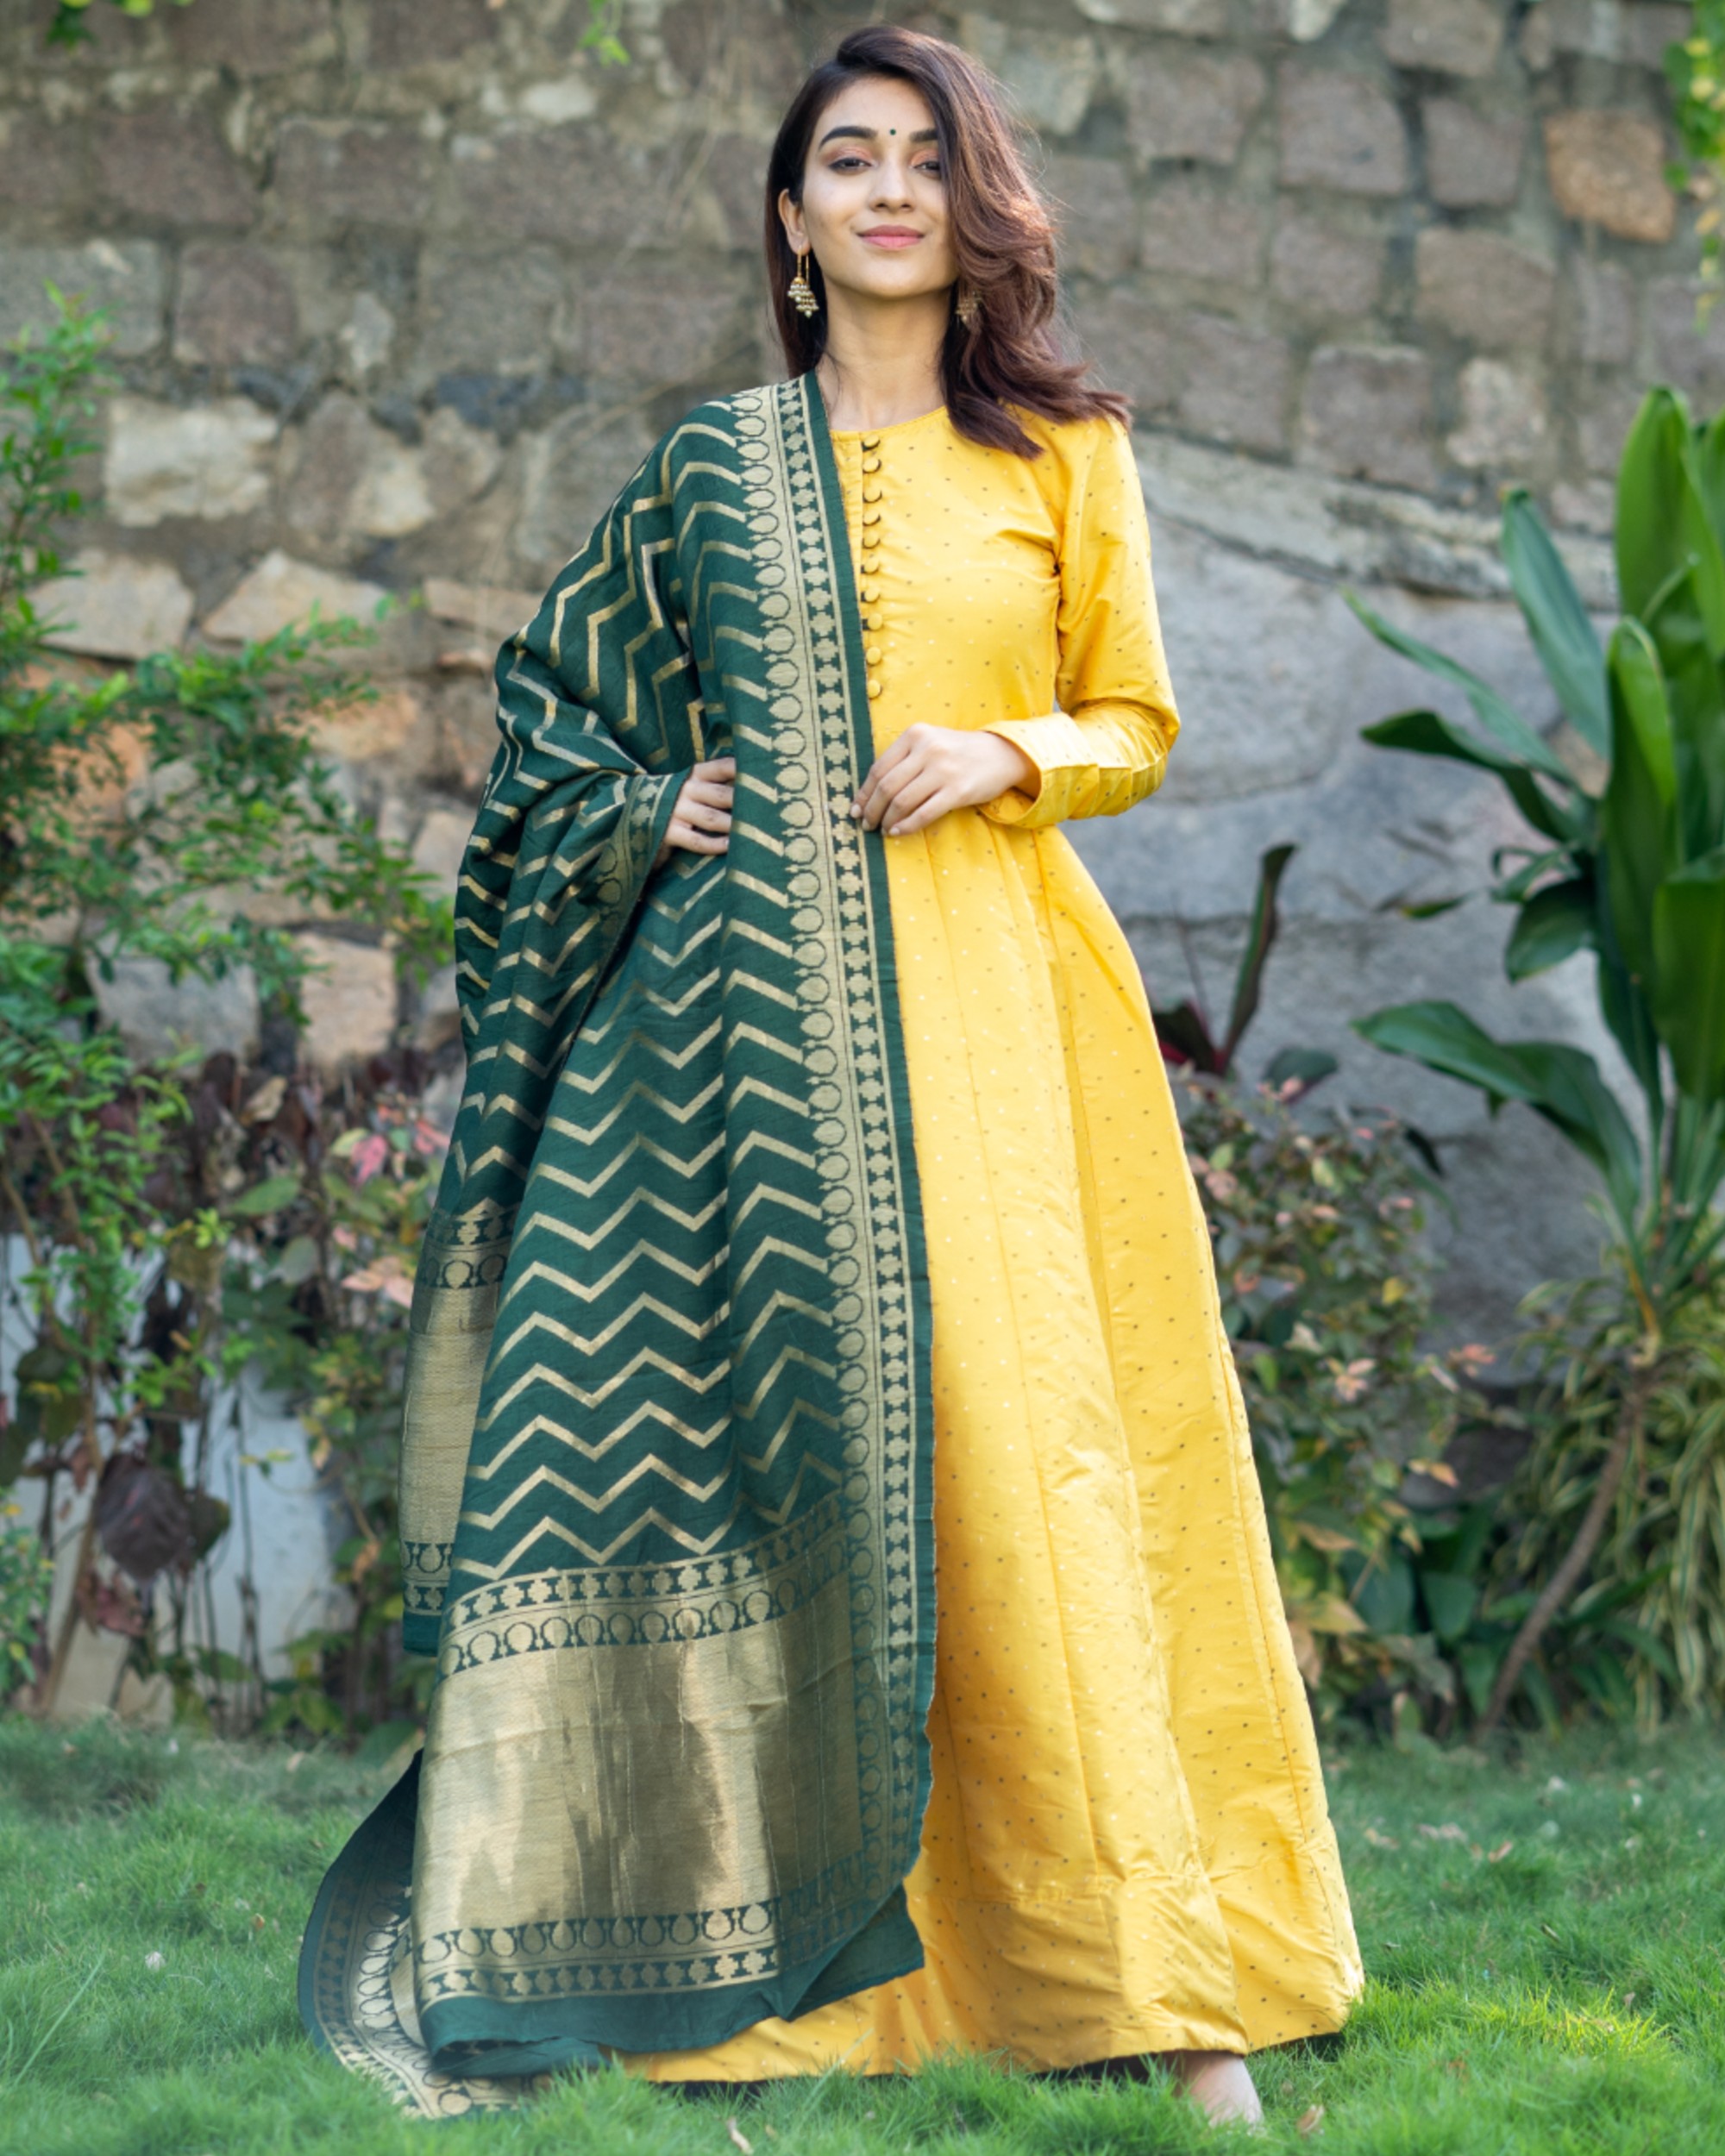 Sharara Suits: A Traditional Outfit for Contemporary Indian Women